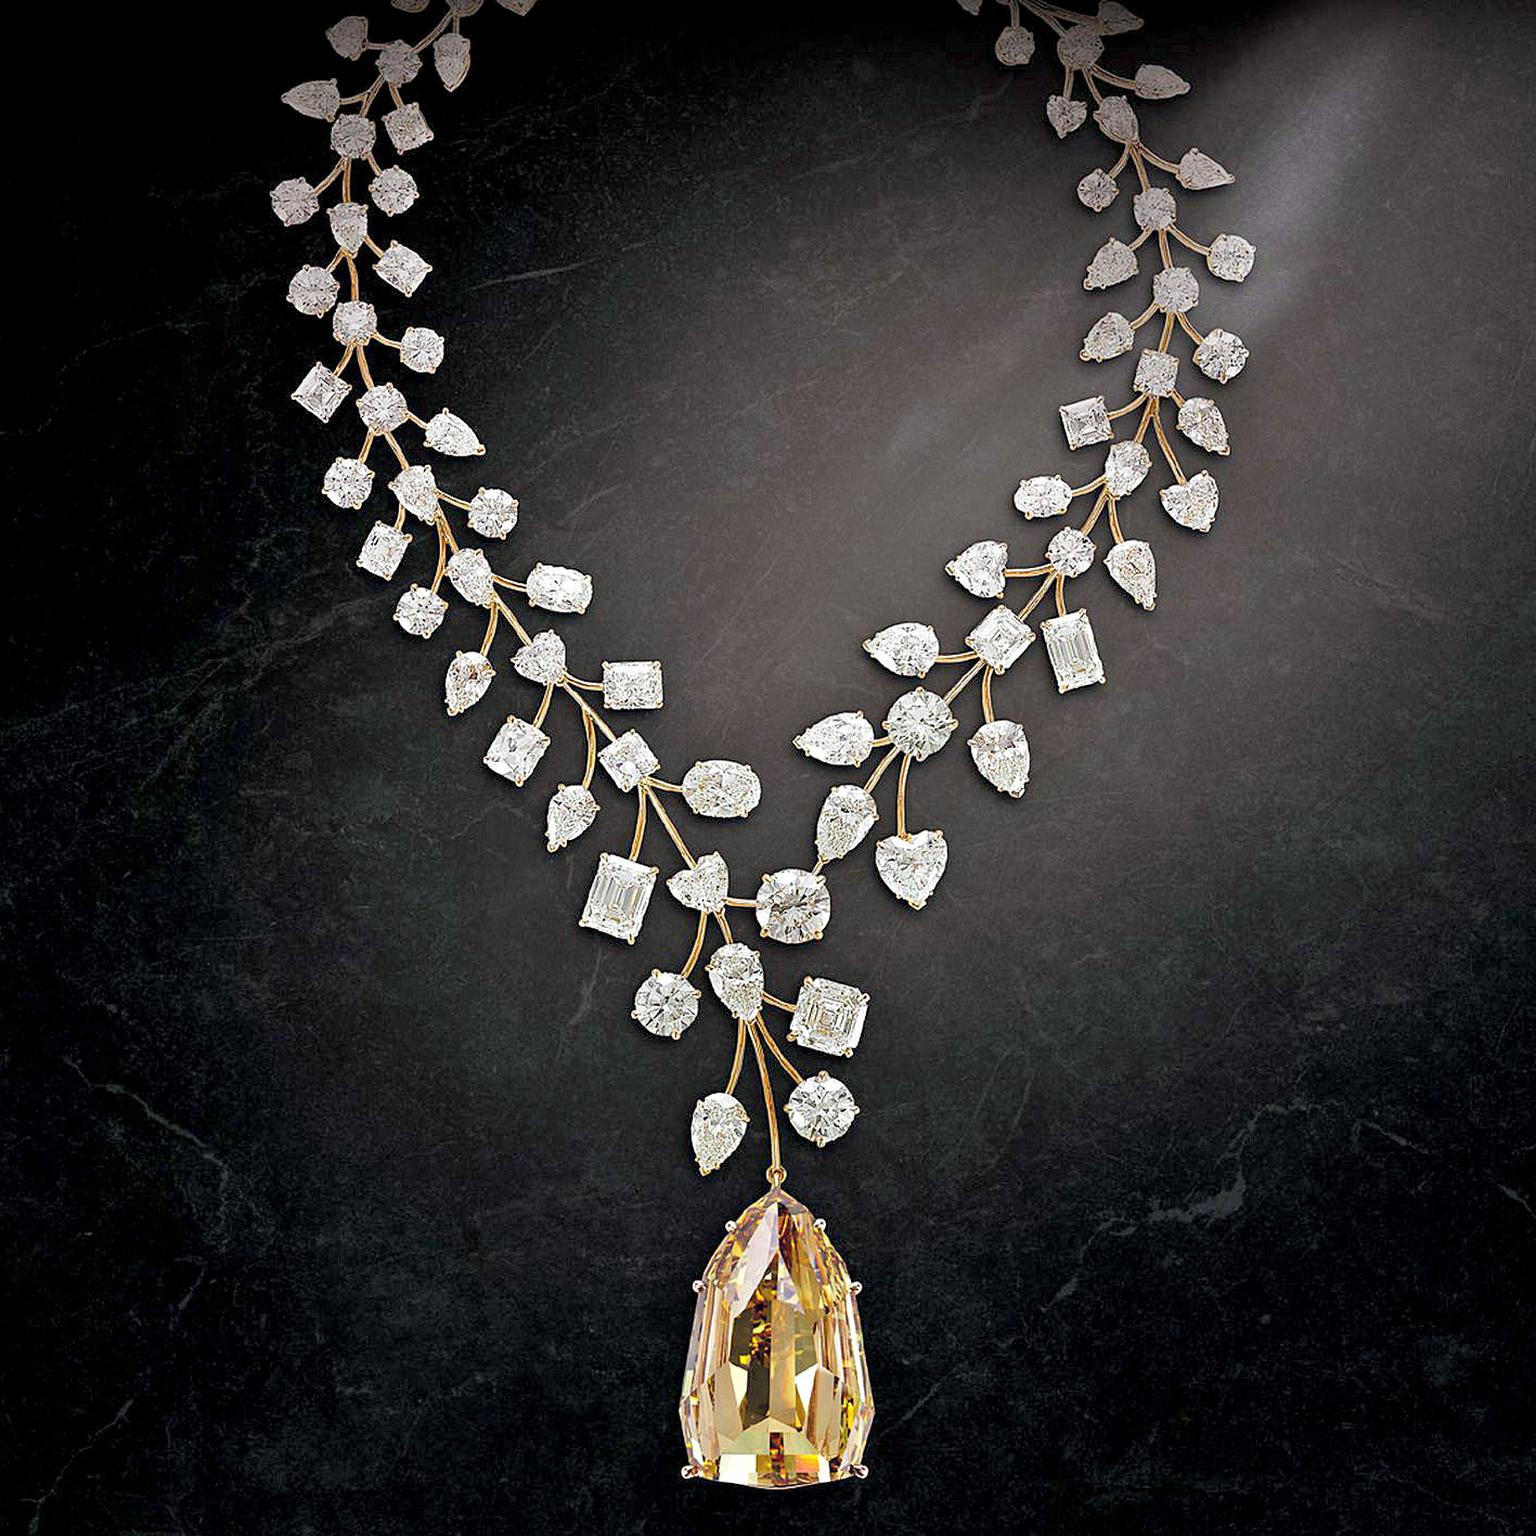 L'Incomparable diamond necklace: most expensive jewelry in the world